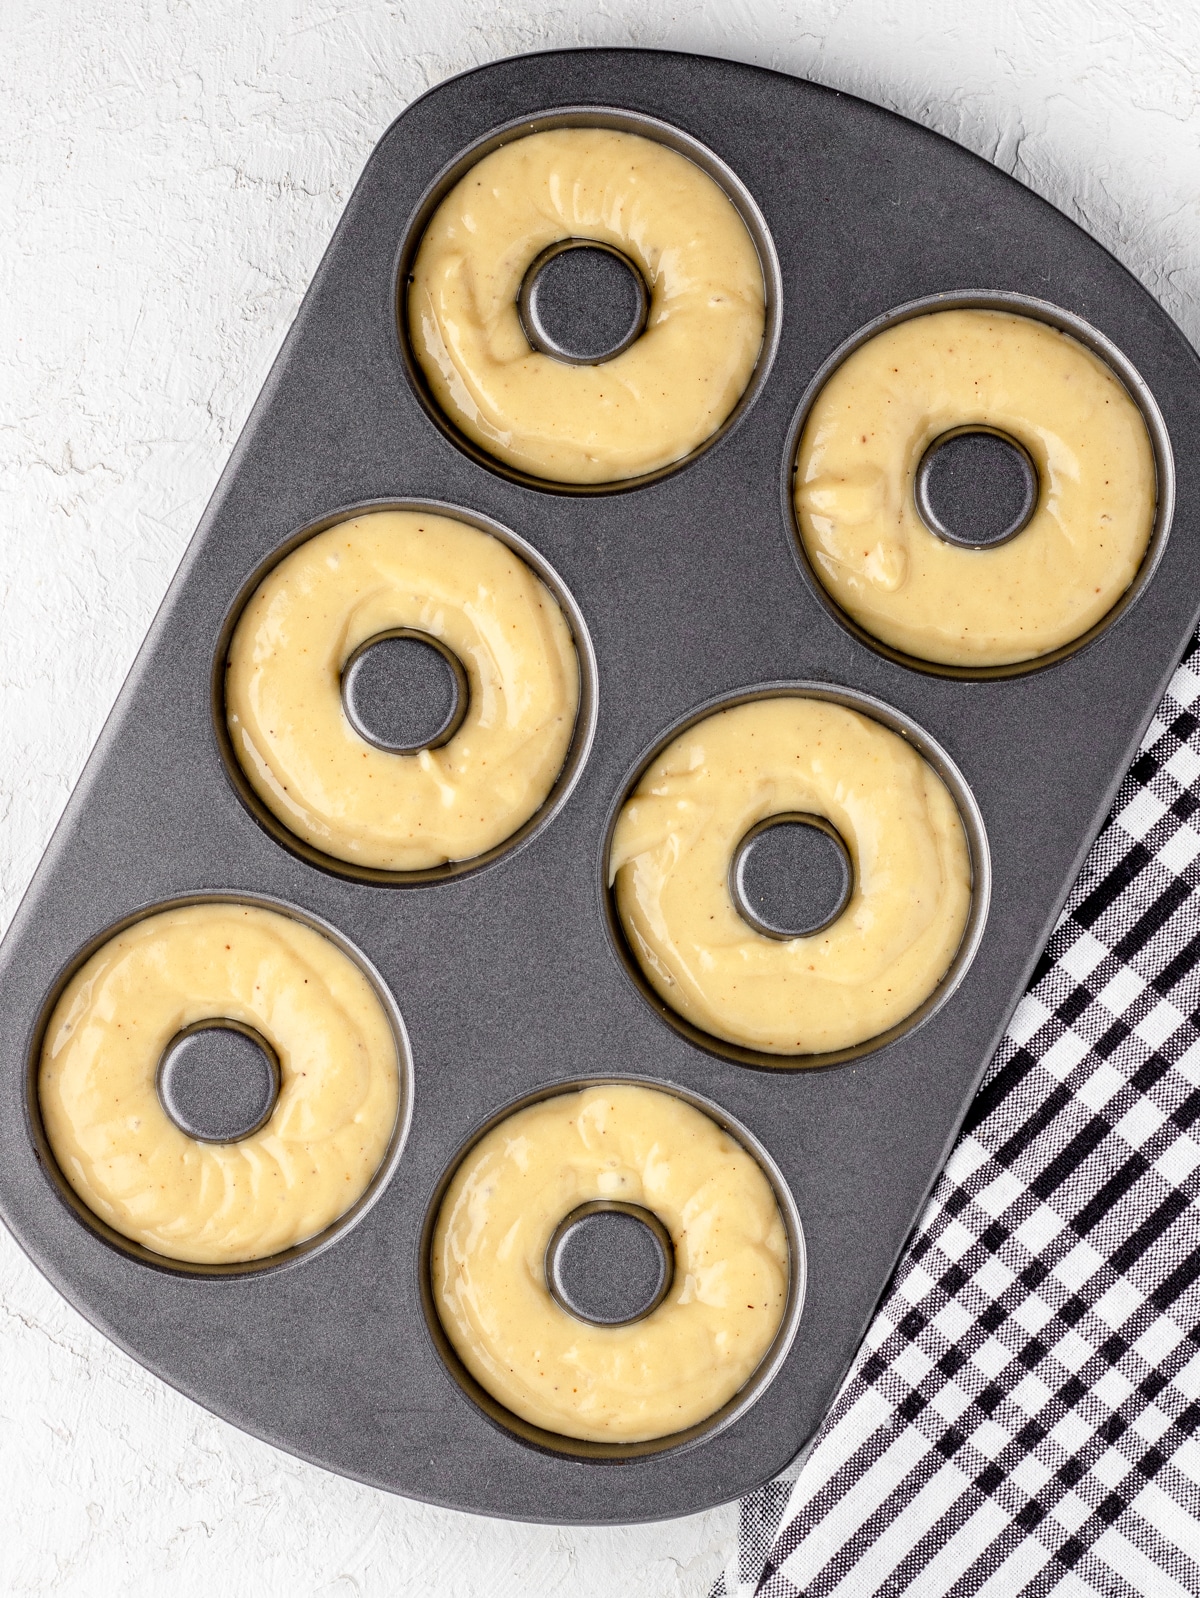 Donuts in donut pan ready to bake.